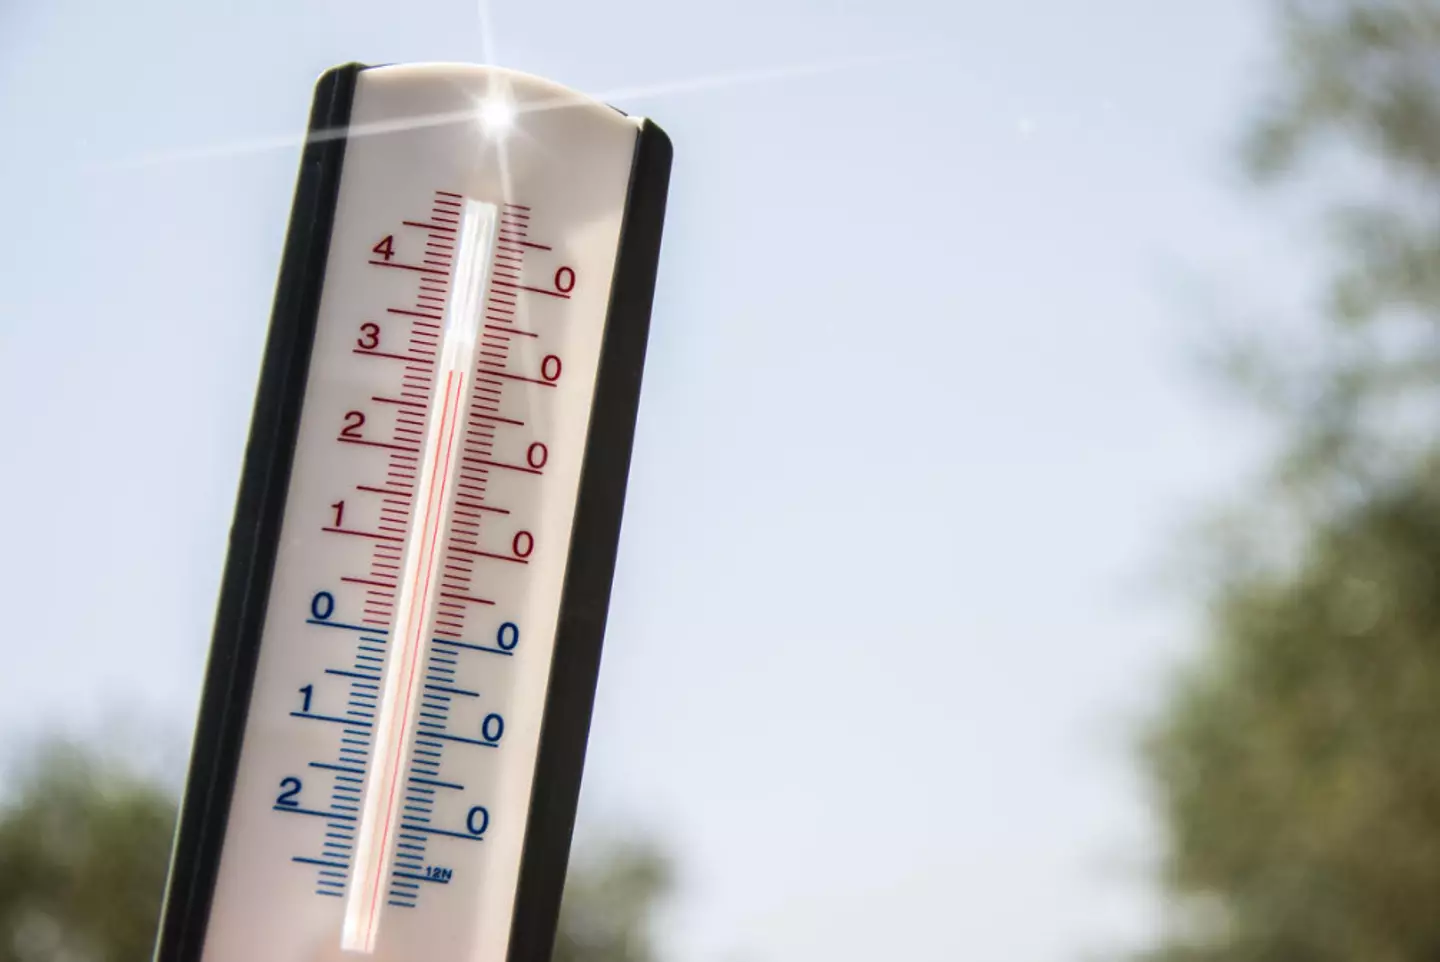 Temperatures are reaching record-breaking heights.